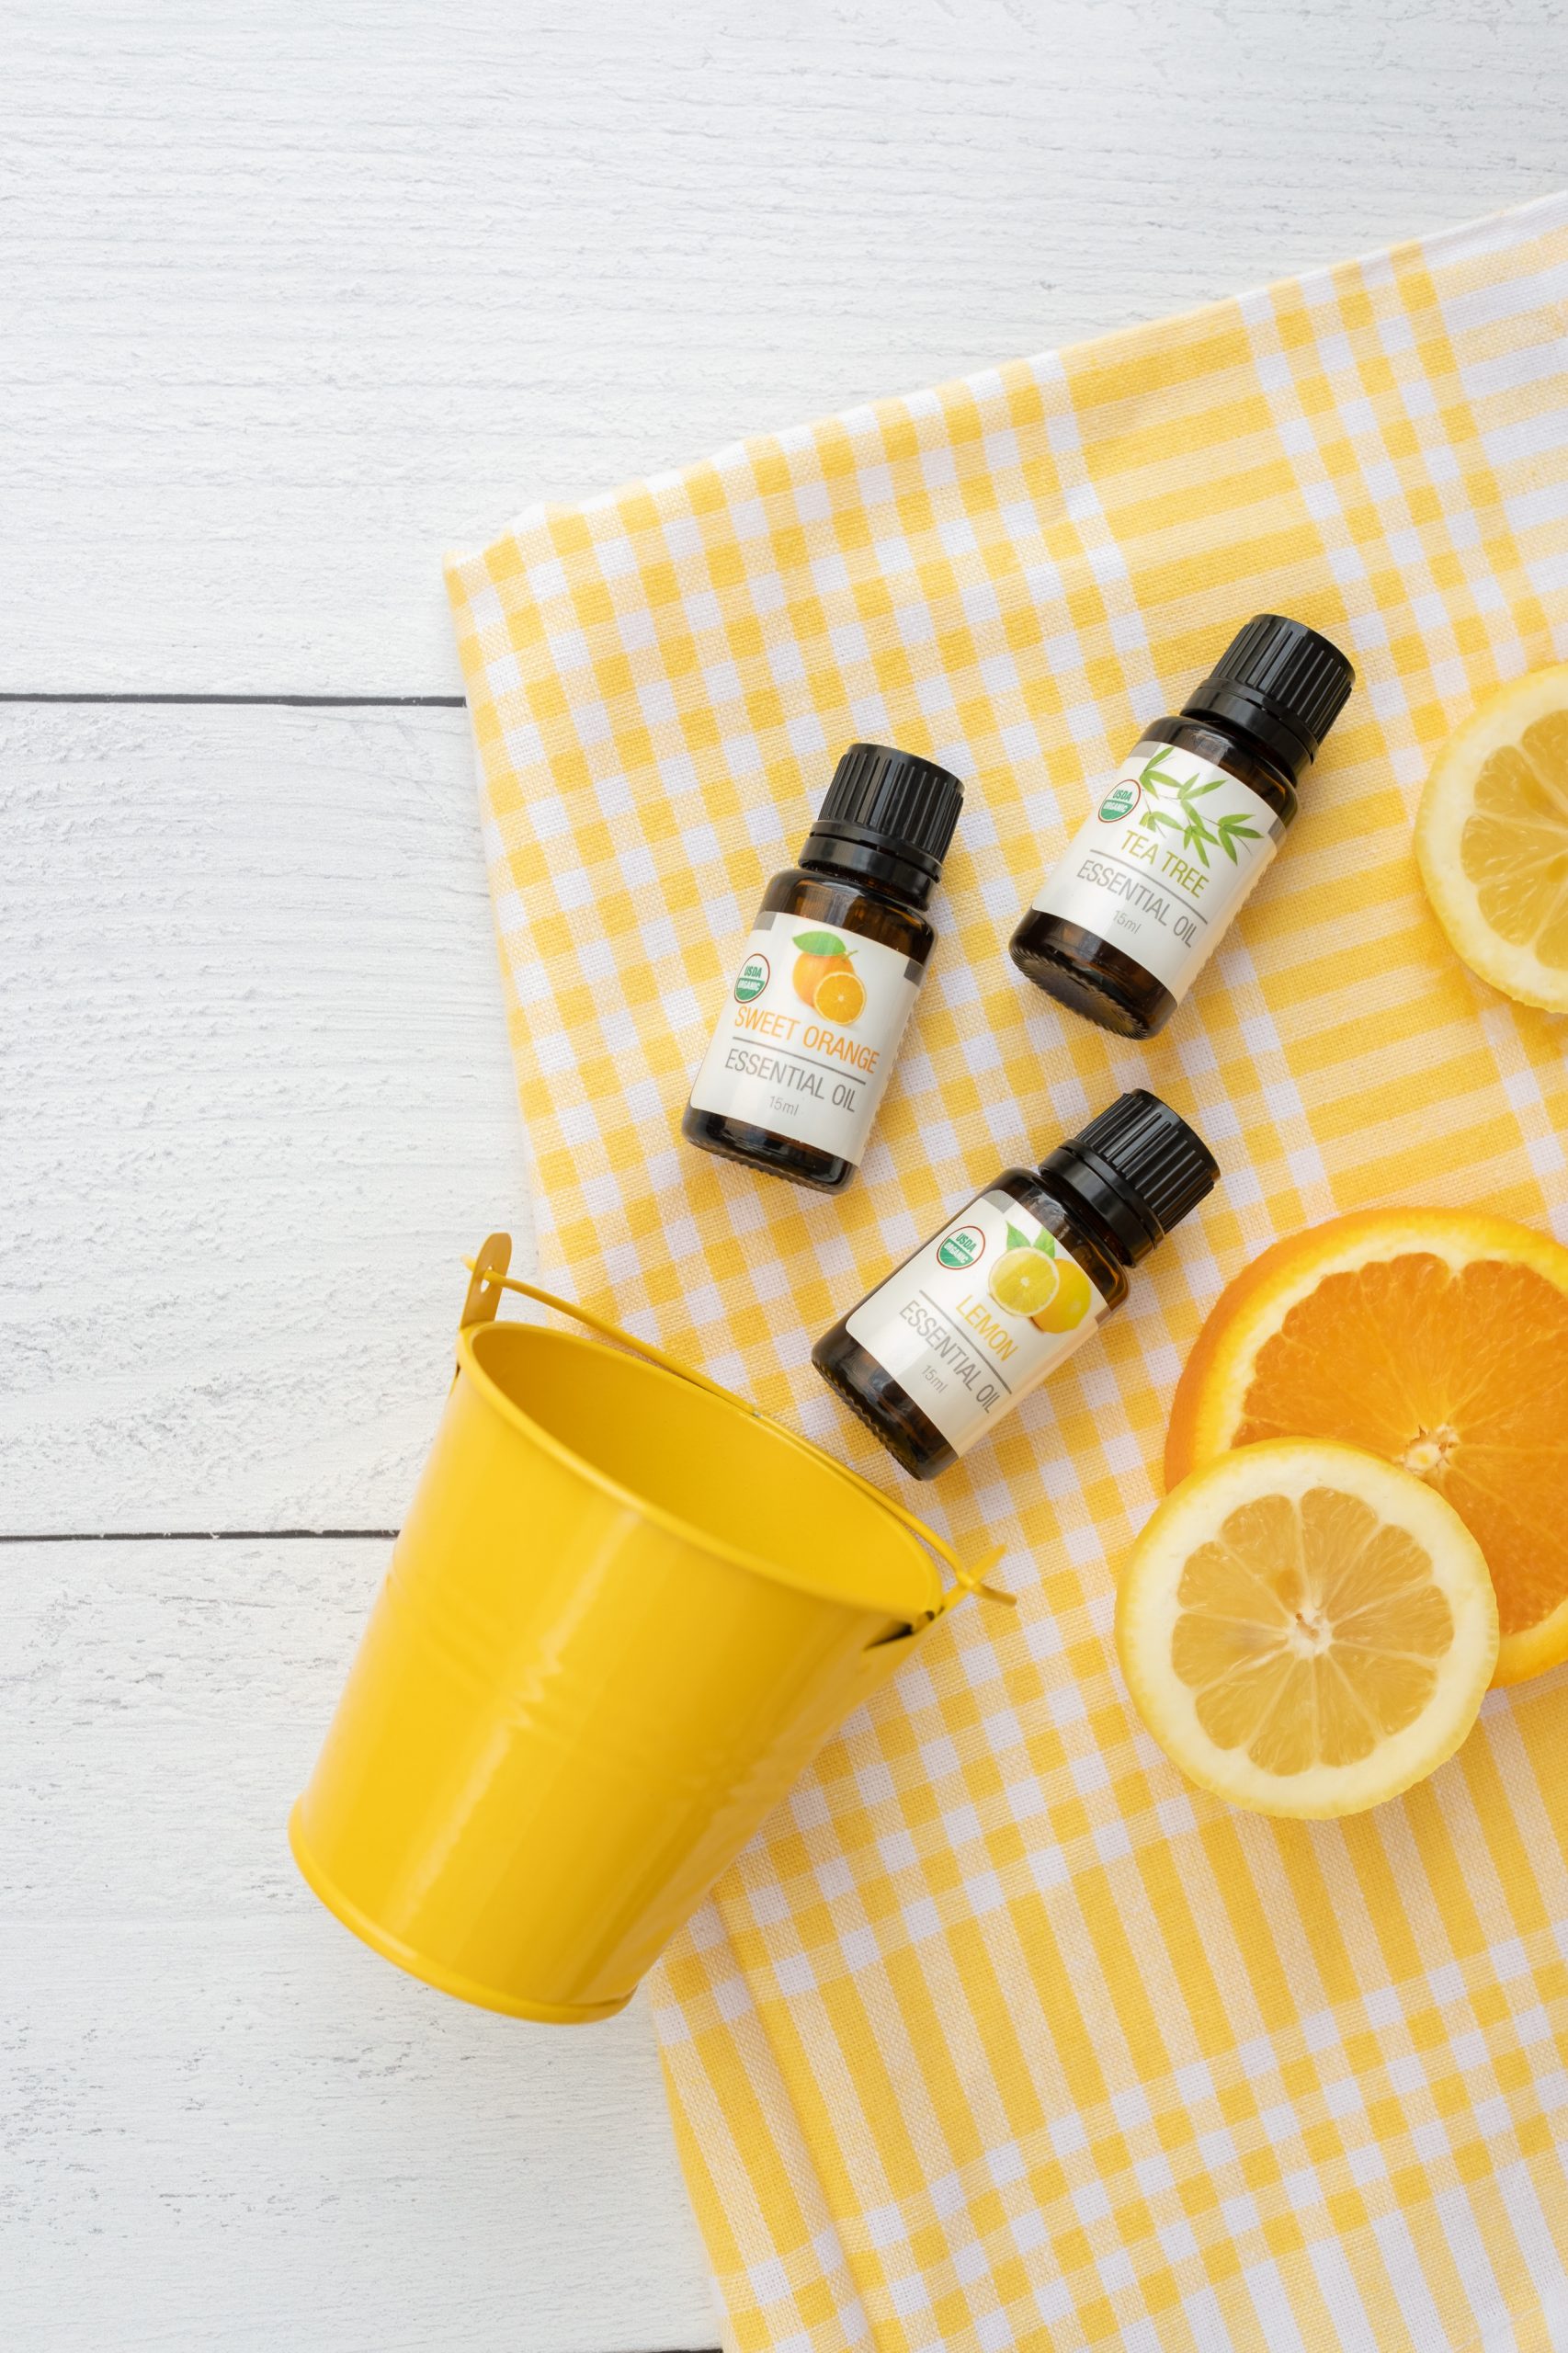 10 Essential Oil Recipes to Freshen Your Laundry